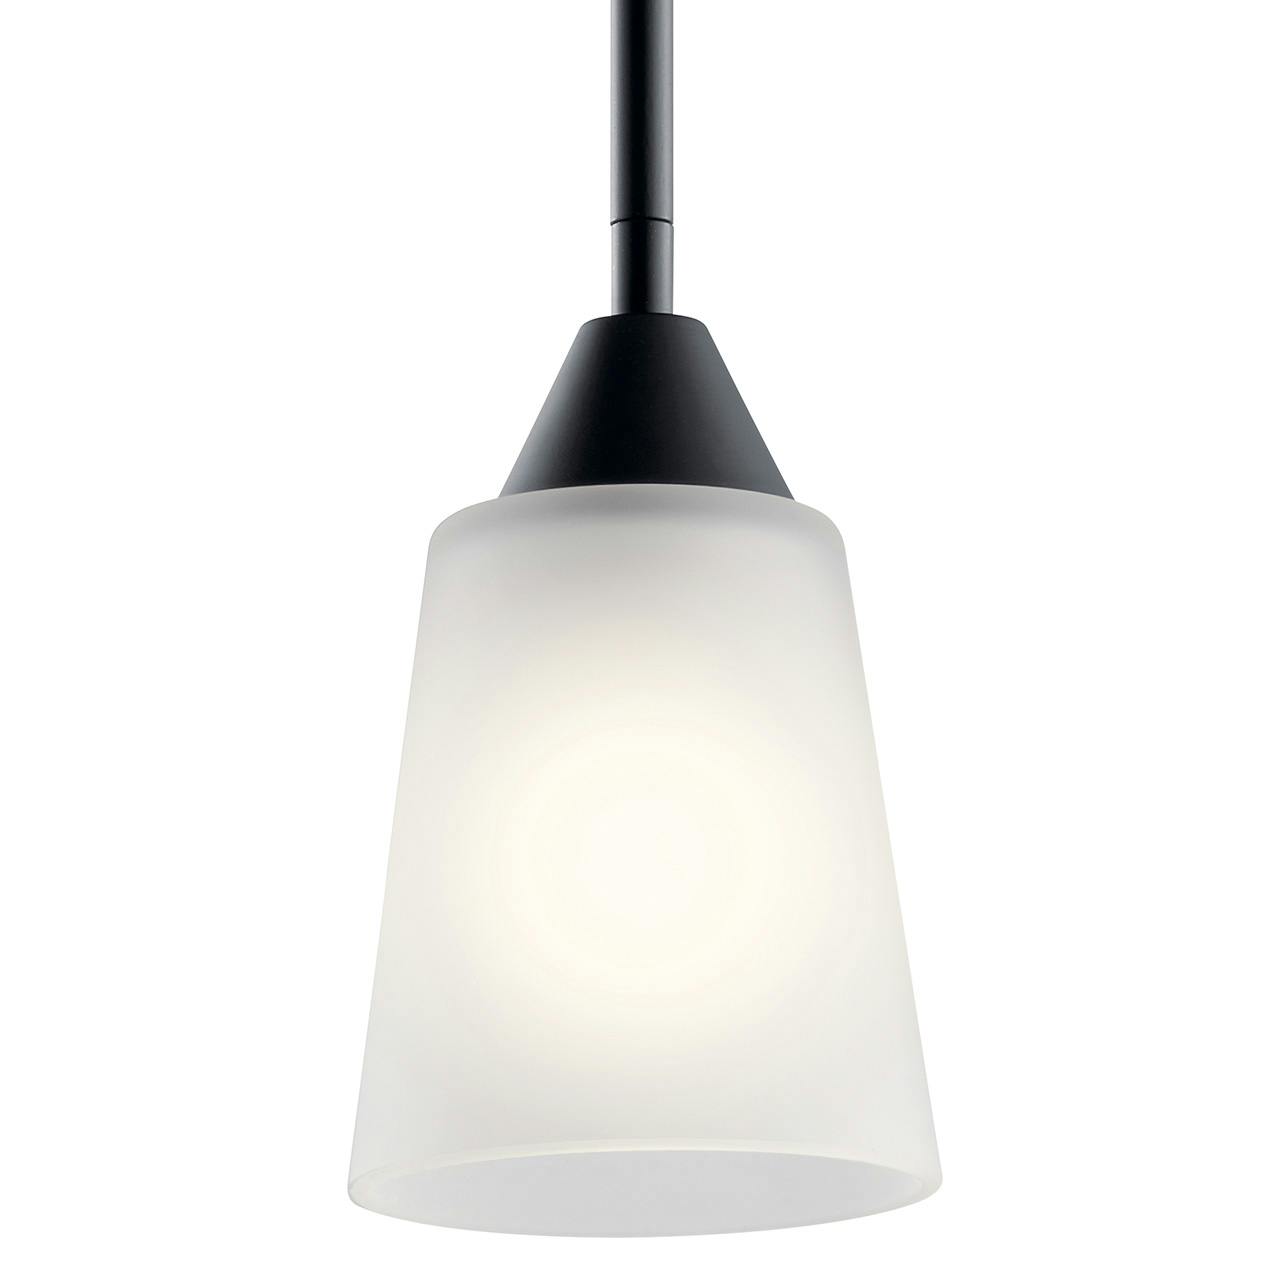 Close up view of the Skagos™ 1 Light Mini Pendant Black on a white background